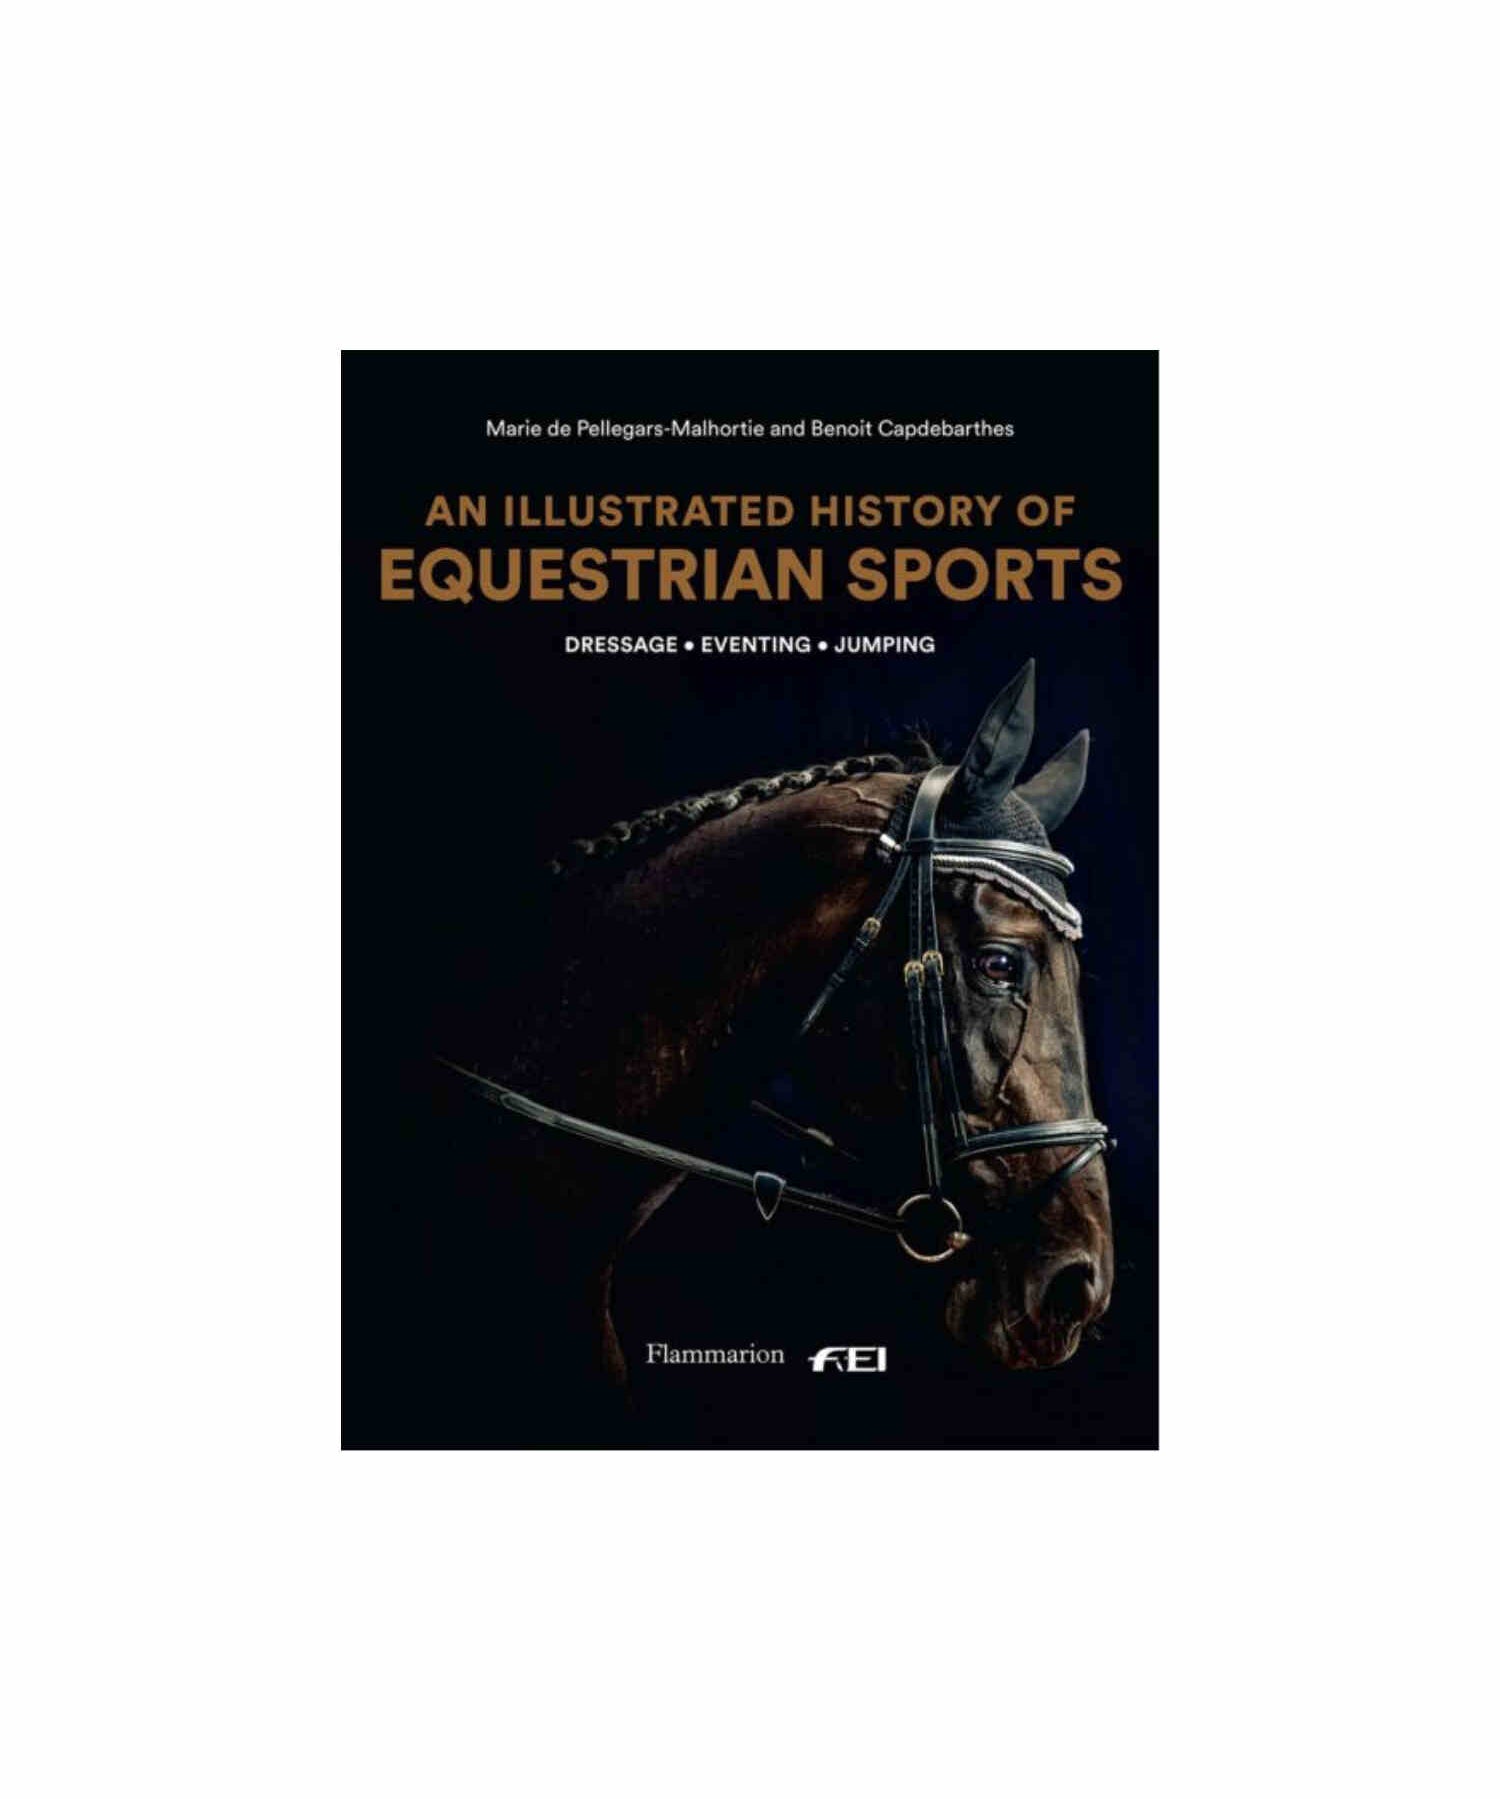 An Coffee Table Book - Illustrated History of Equestrian Sports